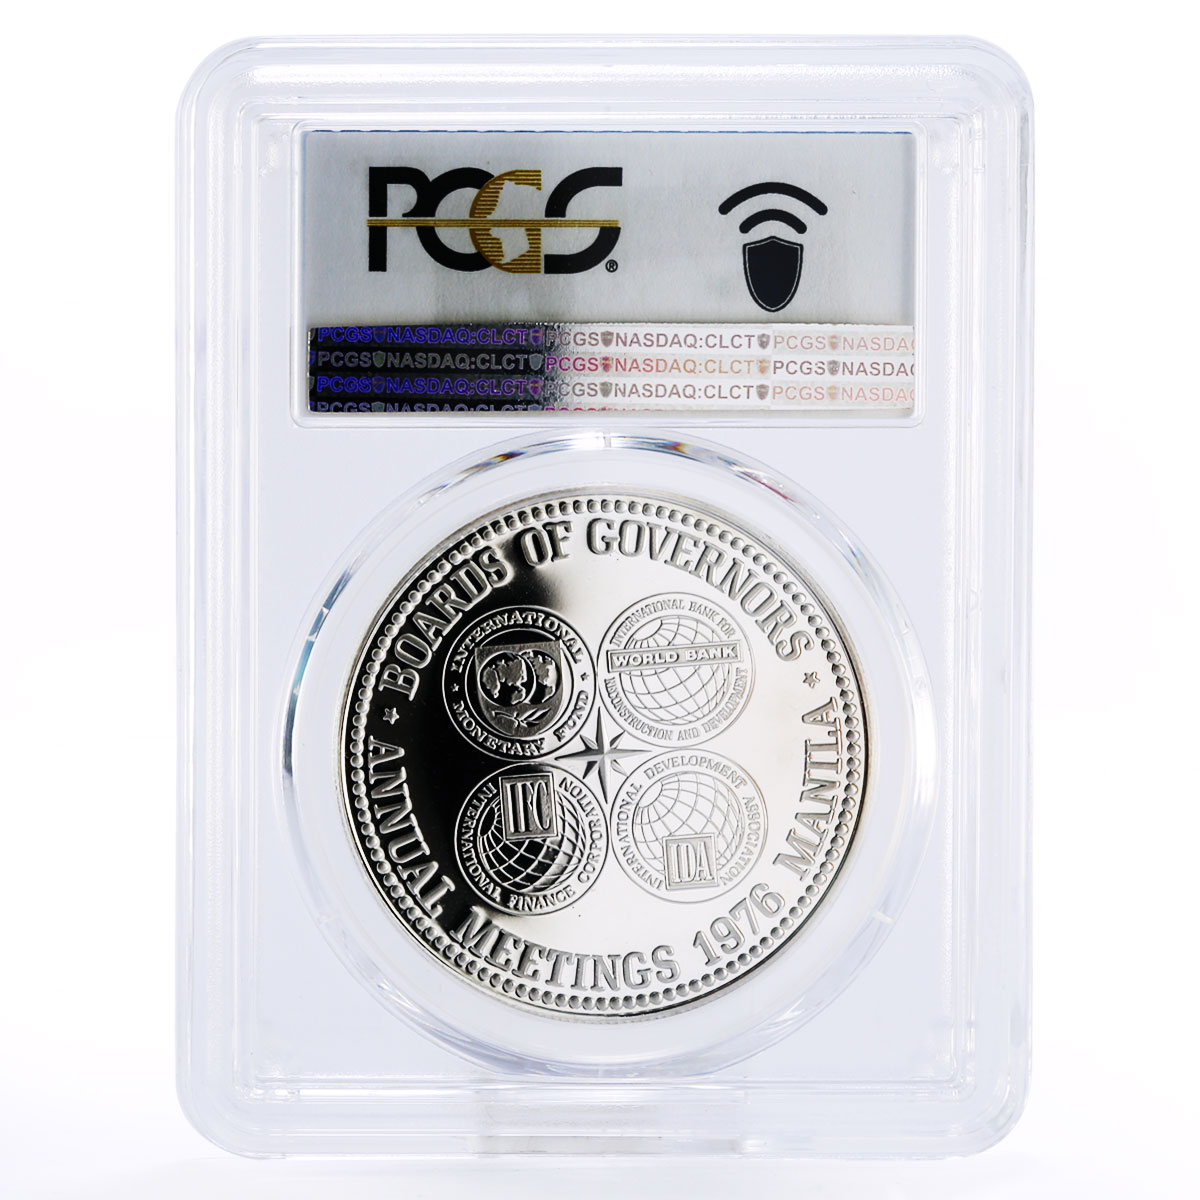 Philippines 50 piso International Meetings PR69 PCGS proof silver coin 1976